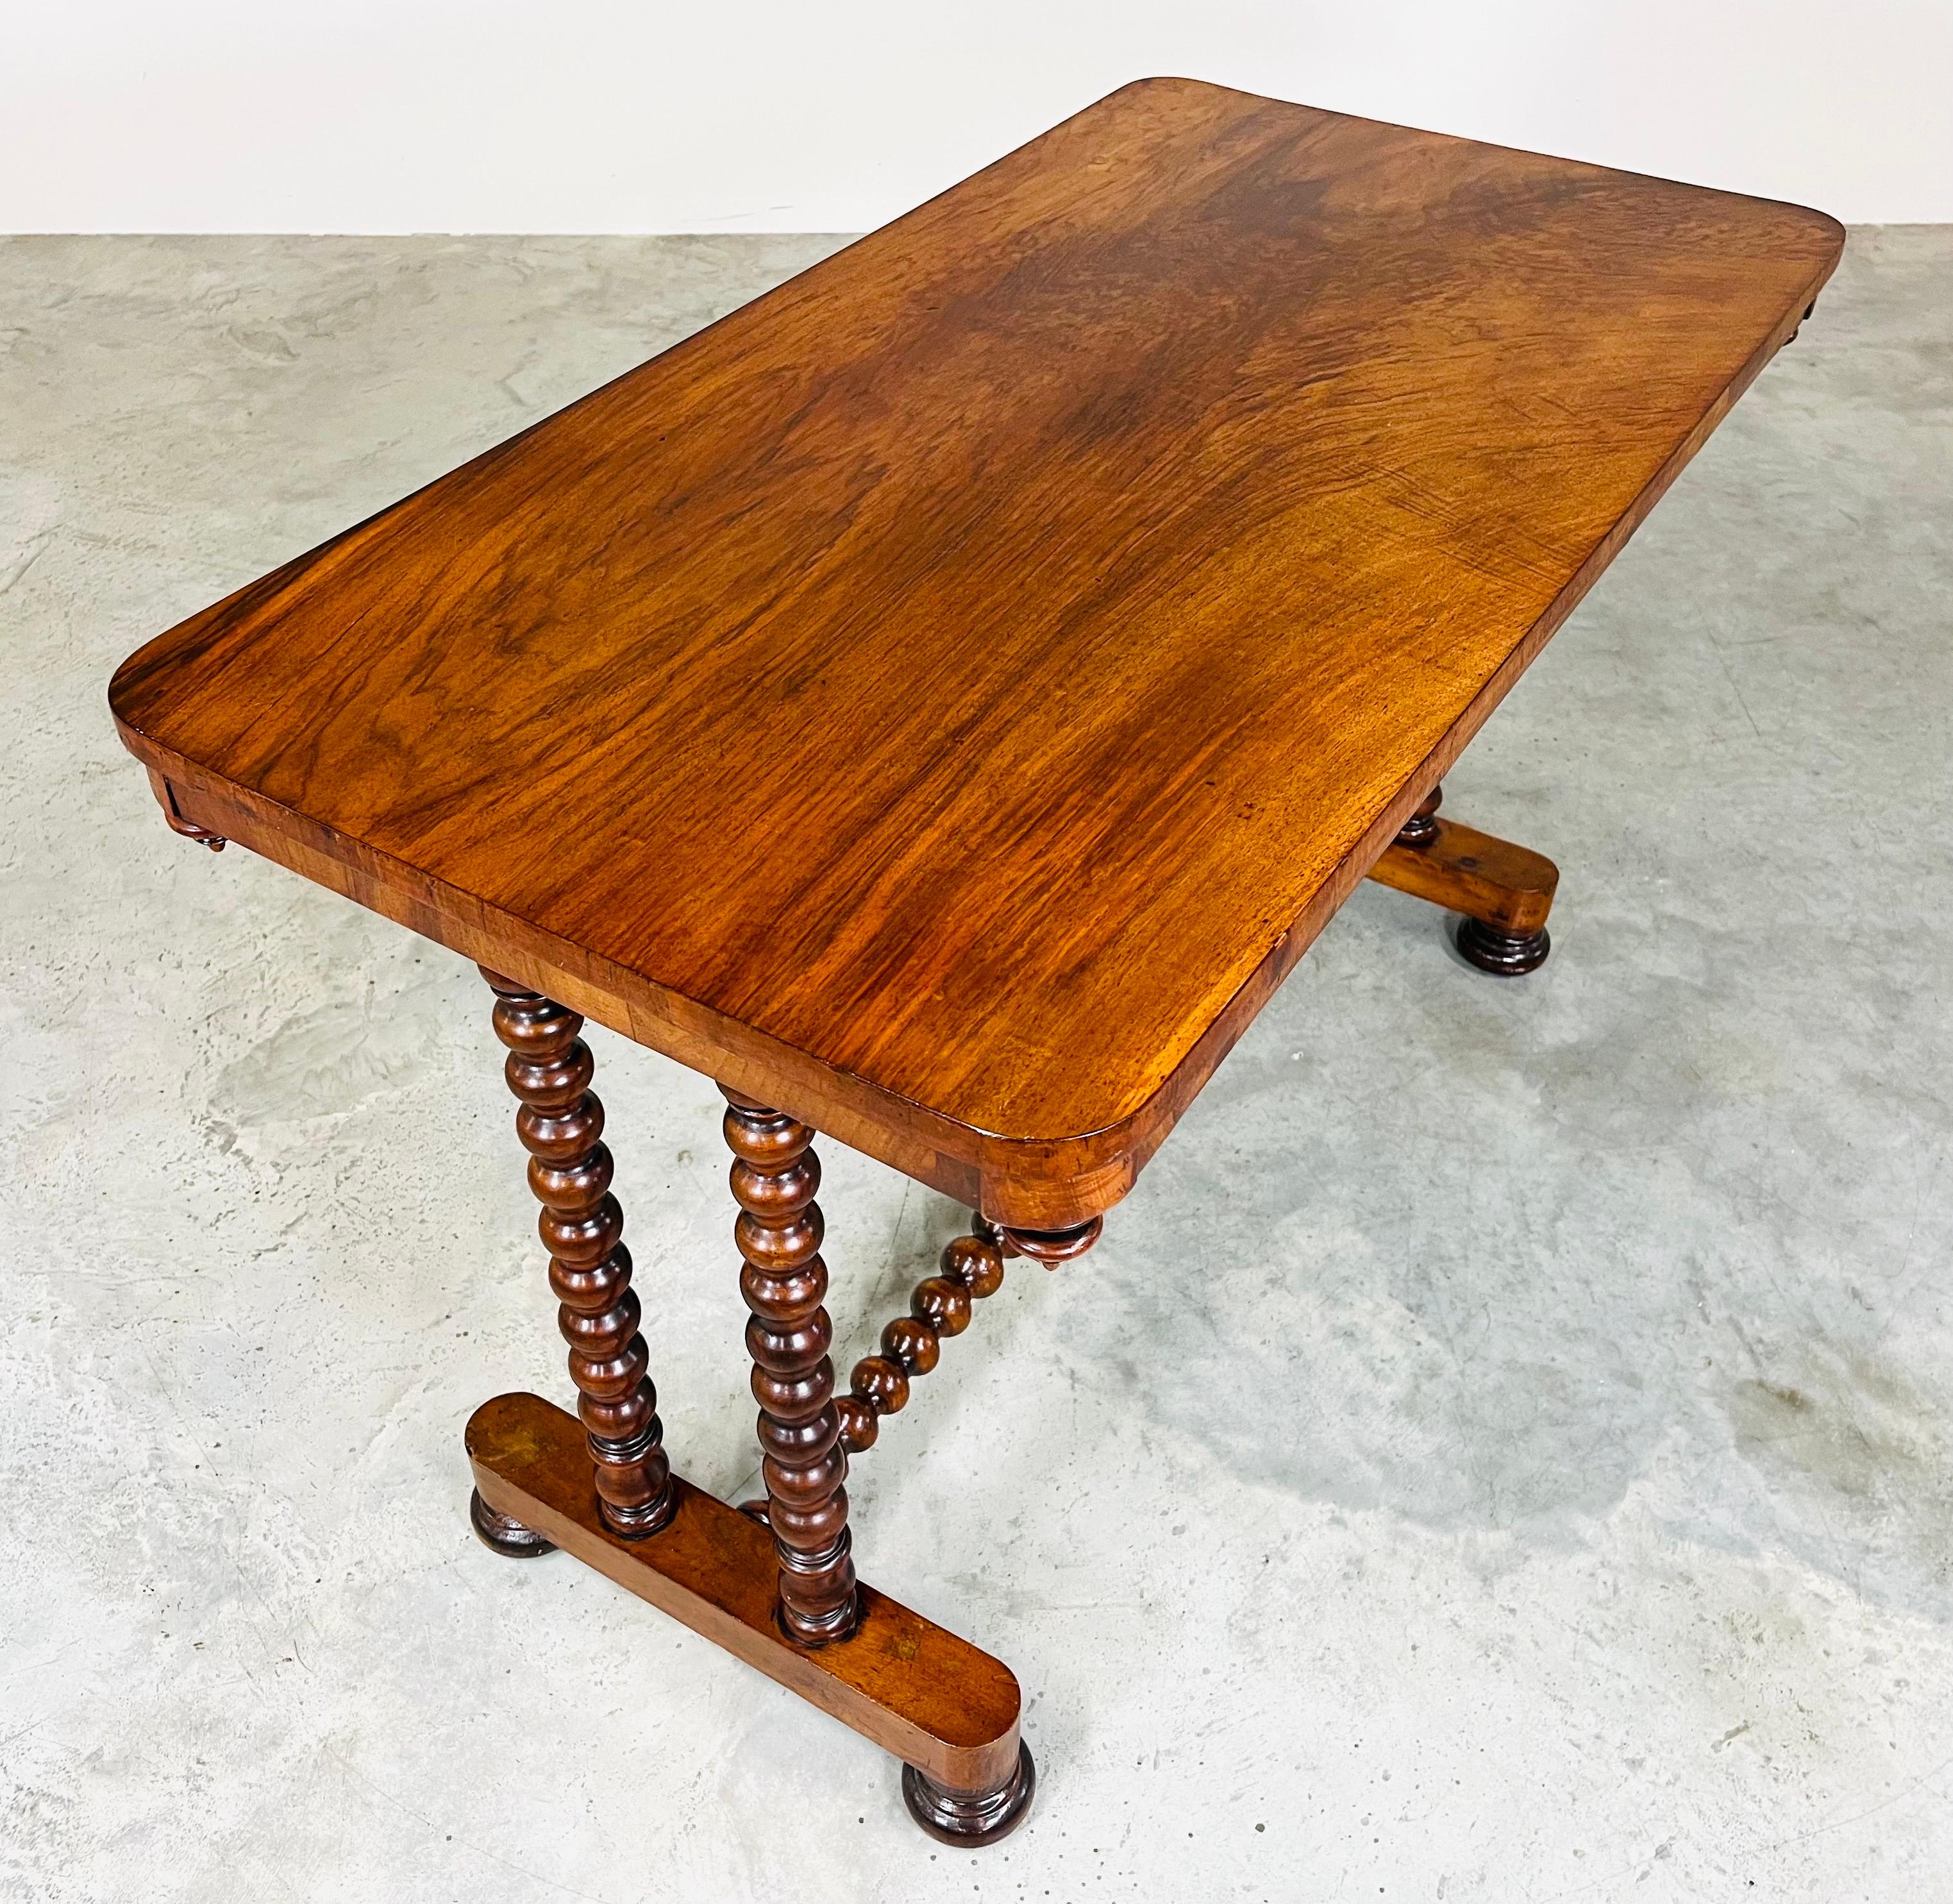 Turned English 19th Century Barley Twist Mahogany Desk Console or Library Table